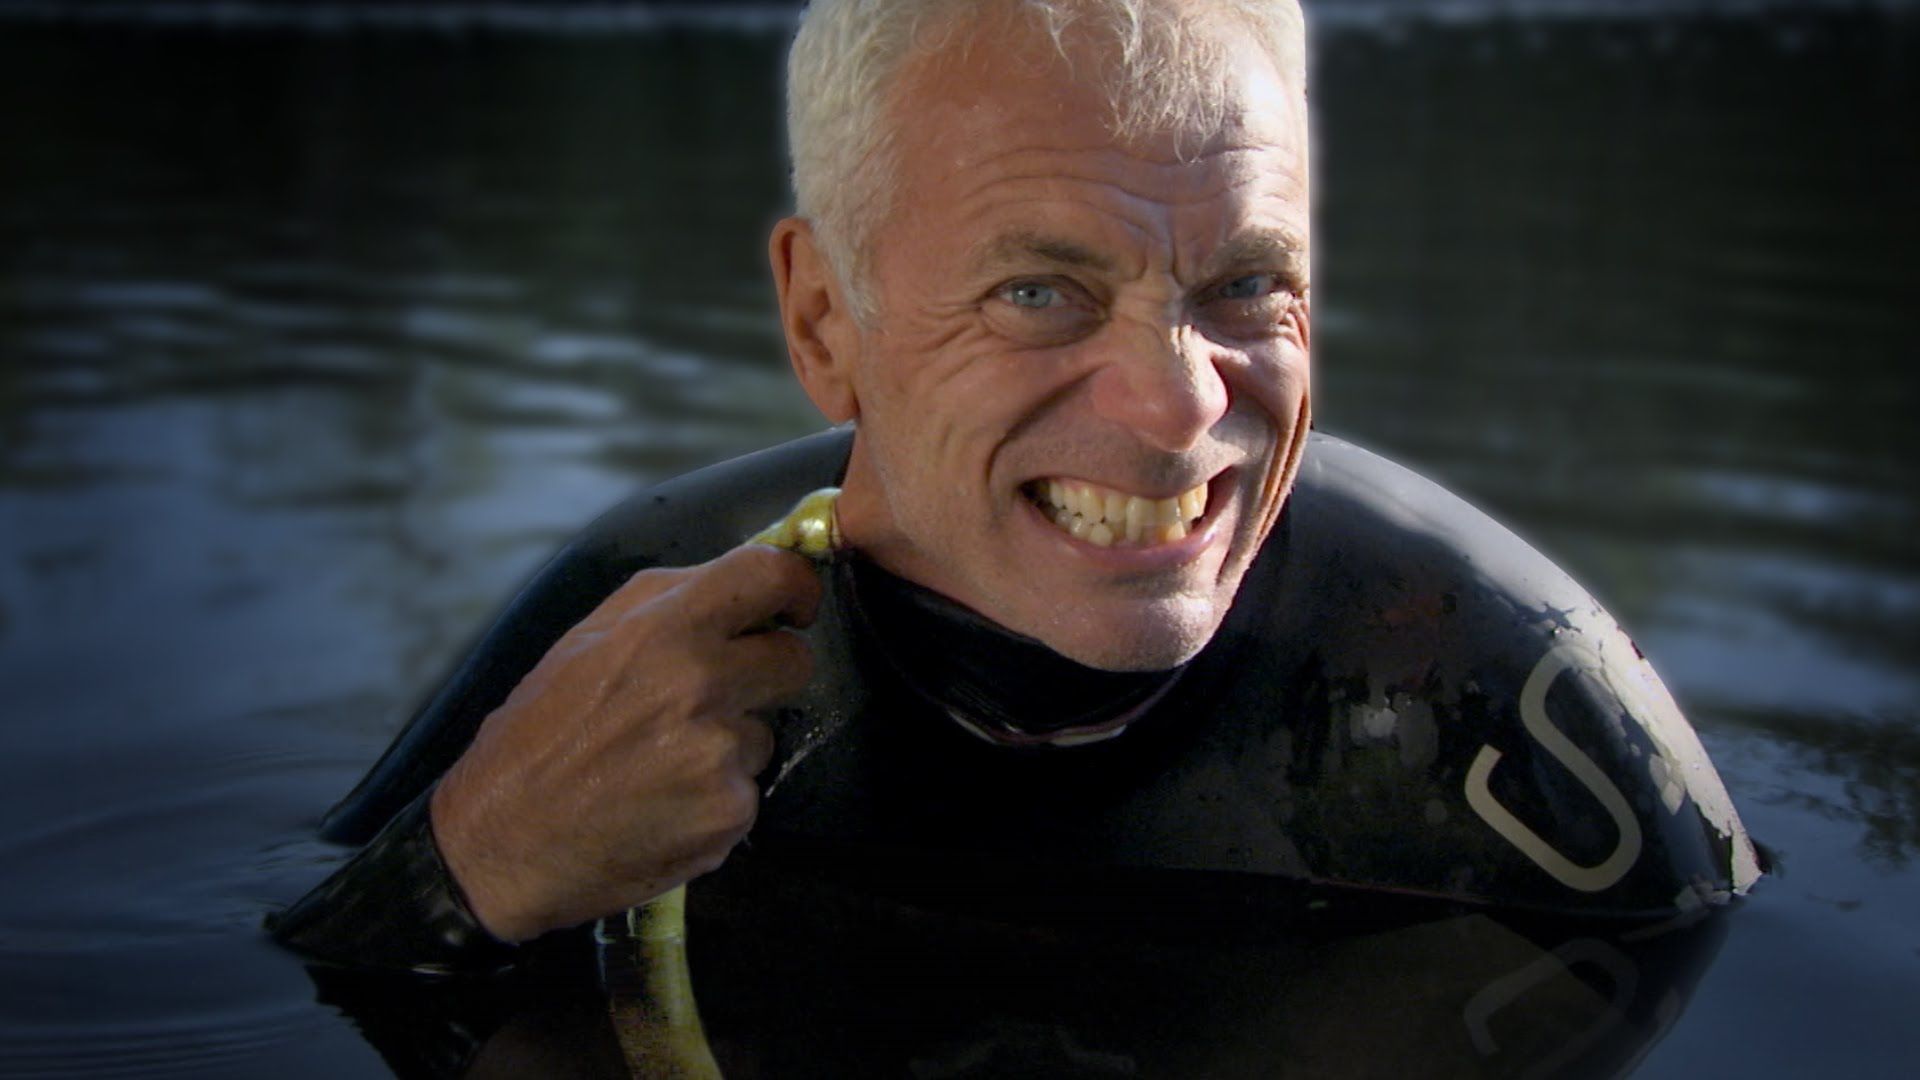 Jeremy Wade: My Wet-and-Wild Search for Missing River Monstersand Answers